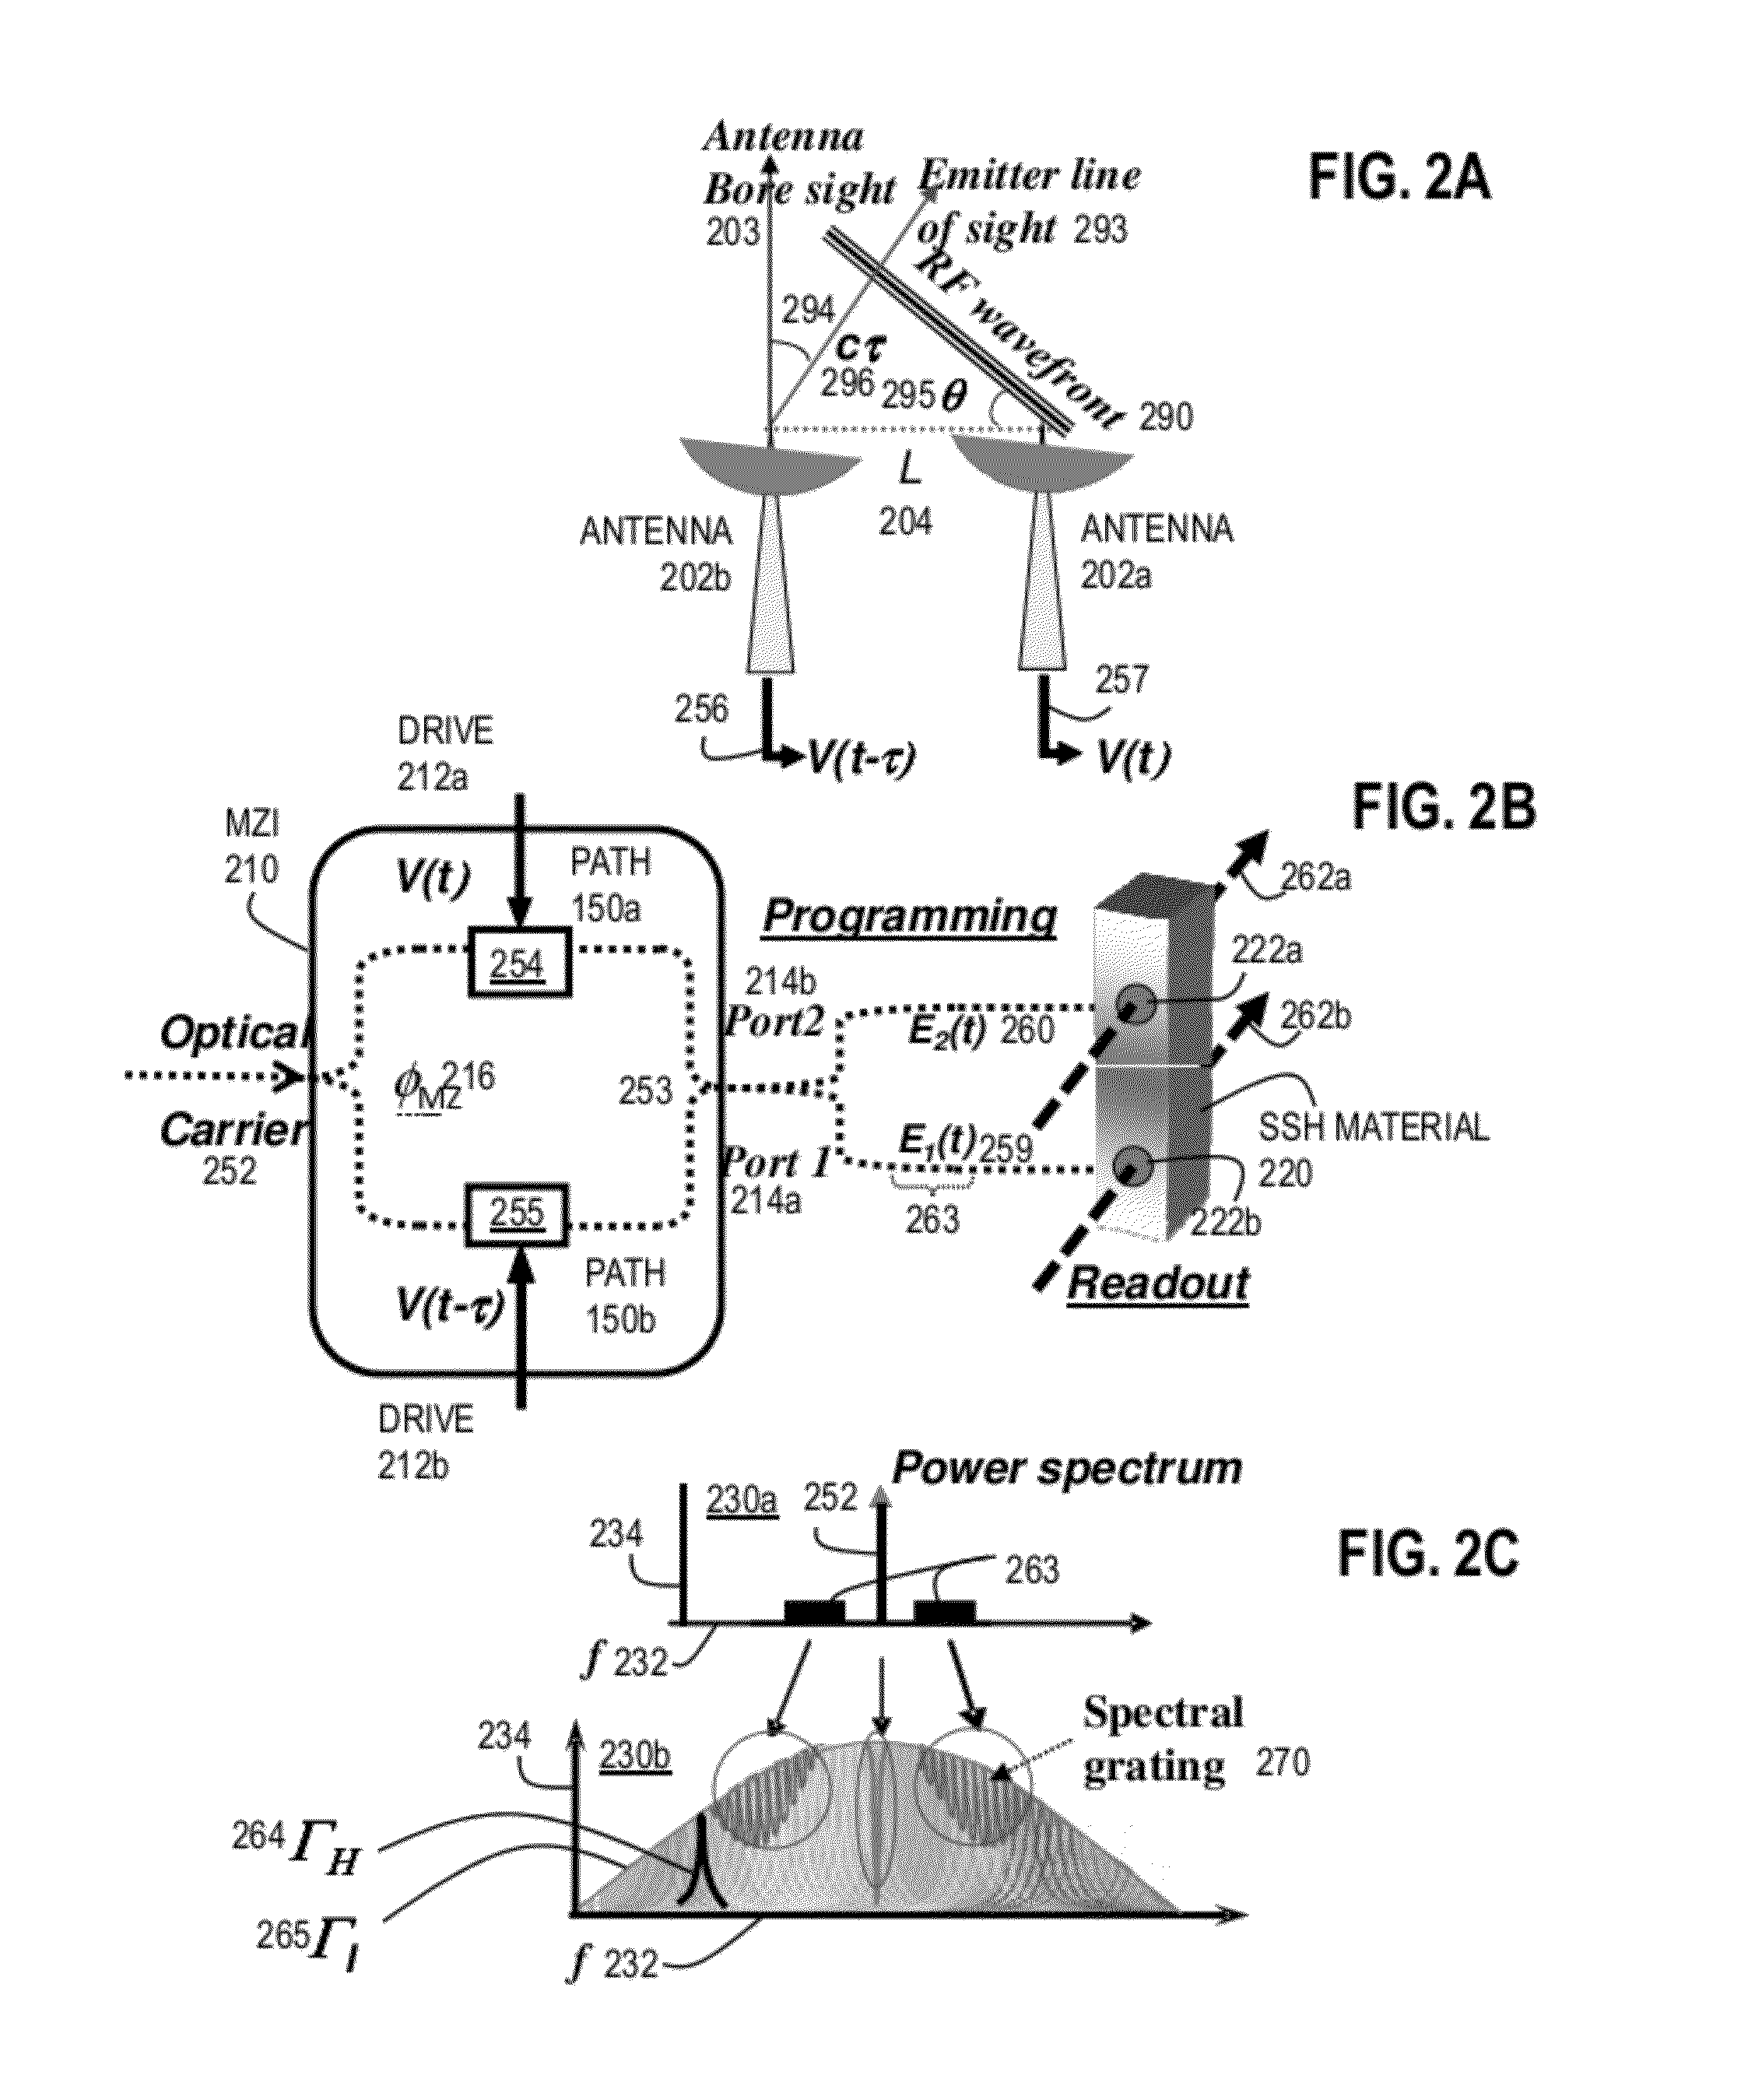 Spatial Spectral Photonic Receiver for Direction Finding via Wideband Phase Sensitive Spectral Mapping